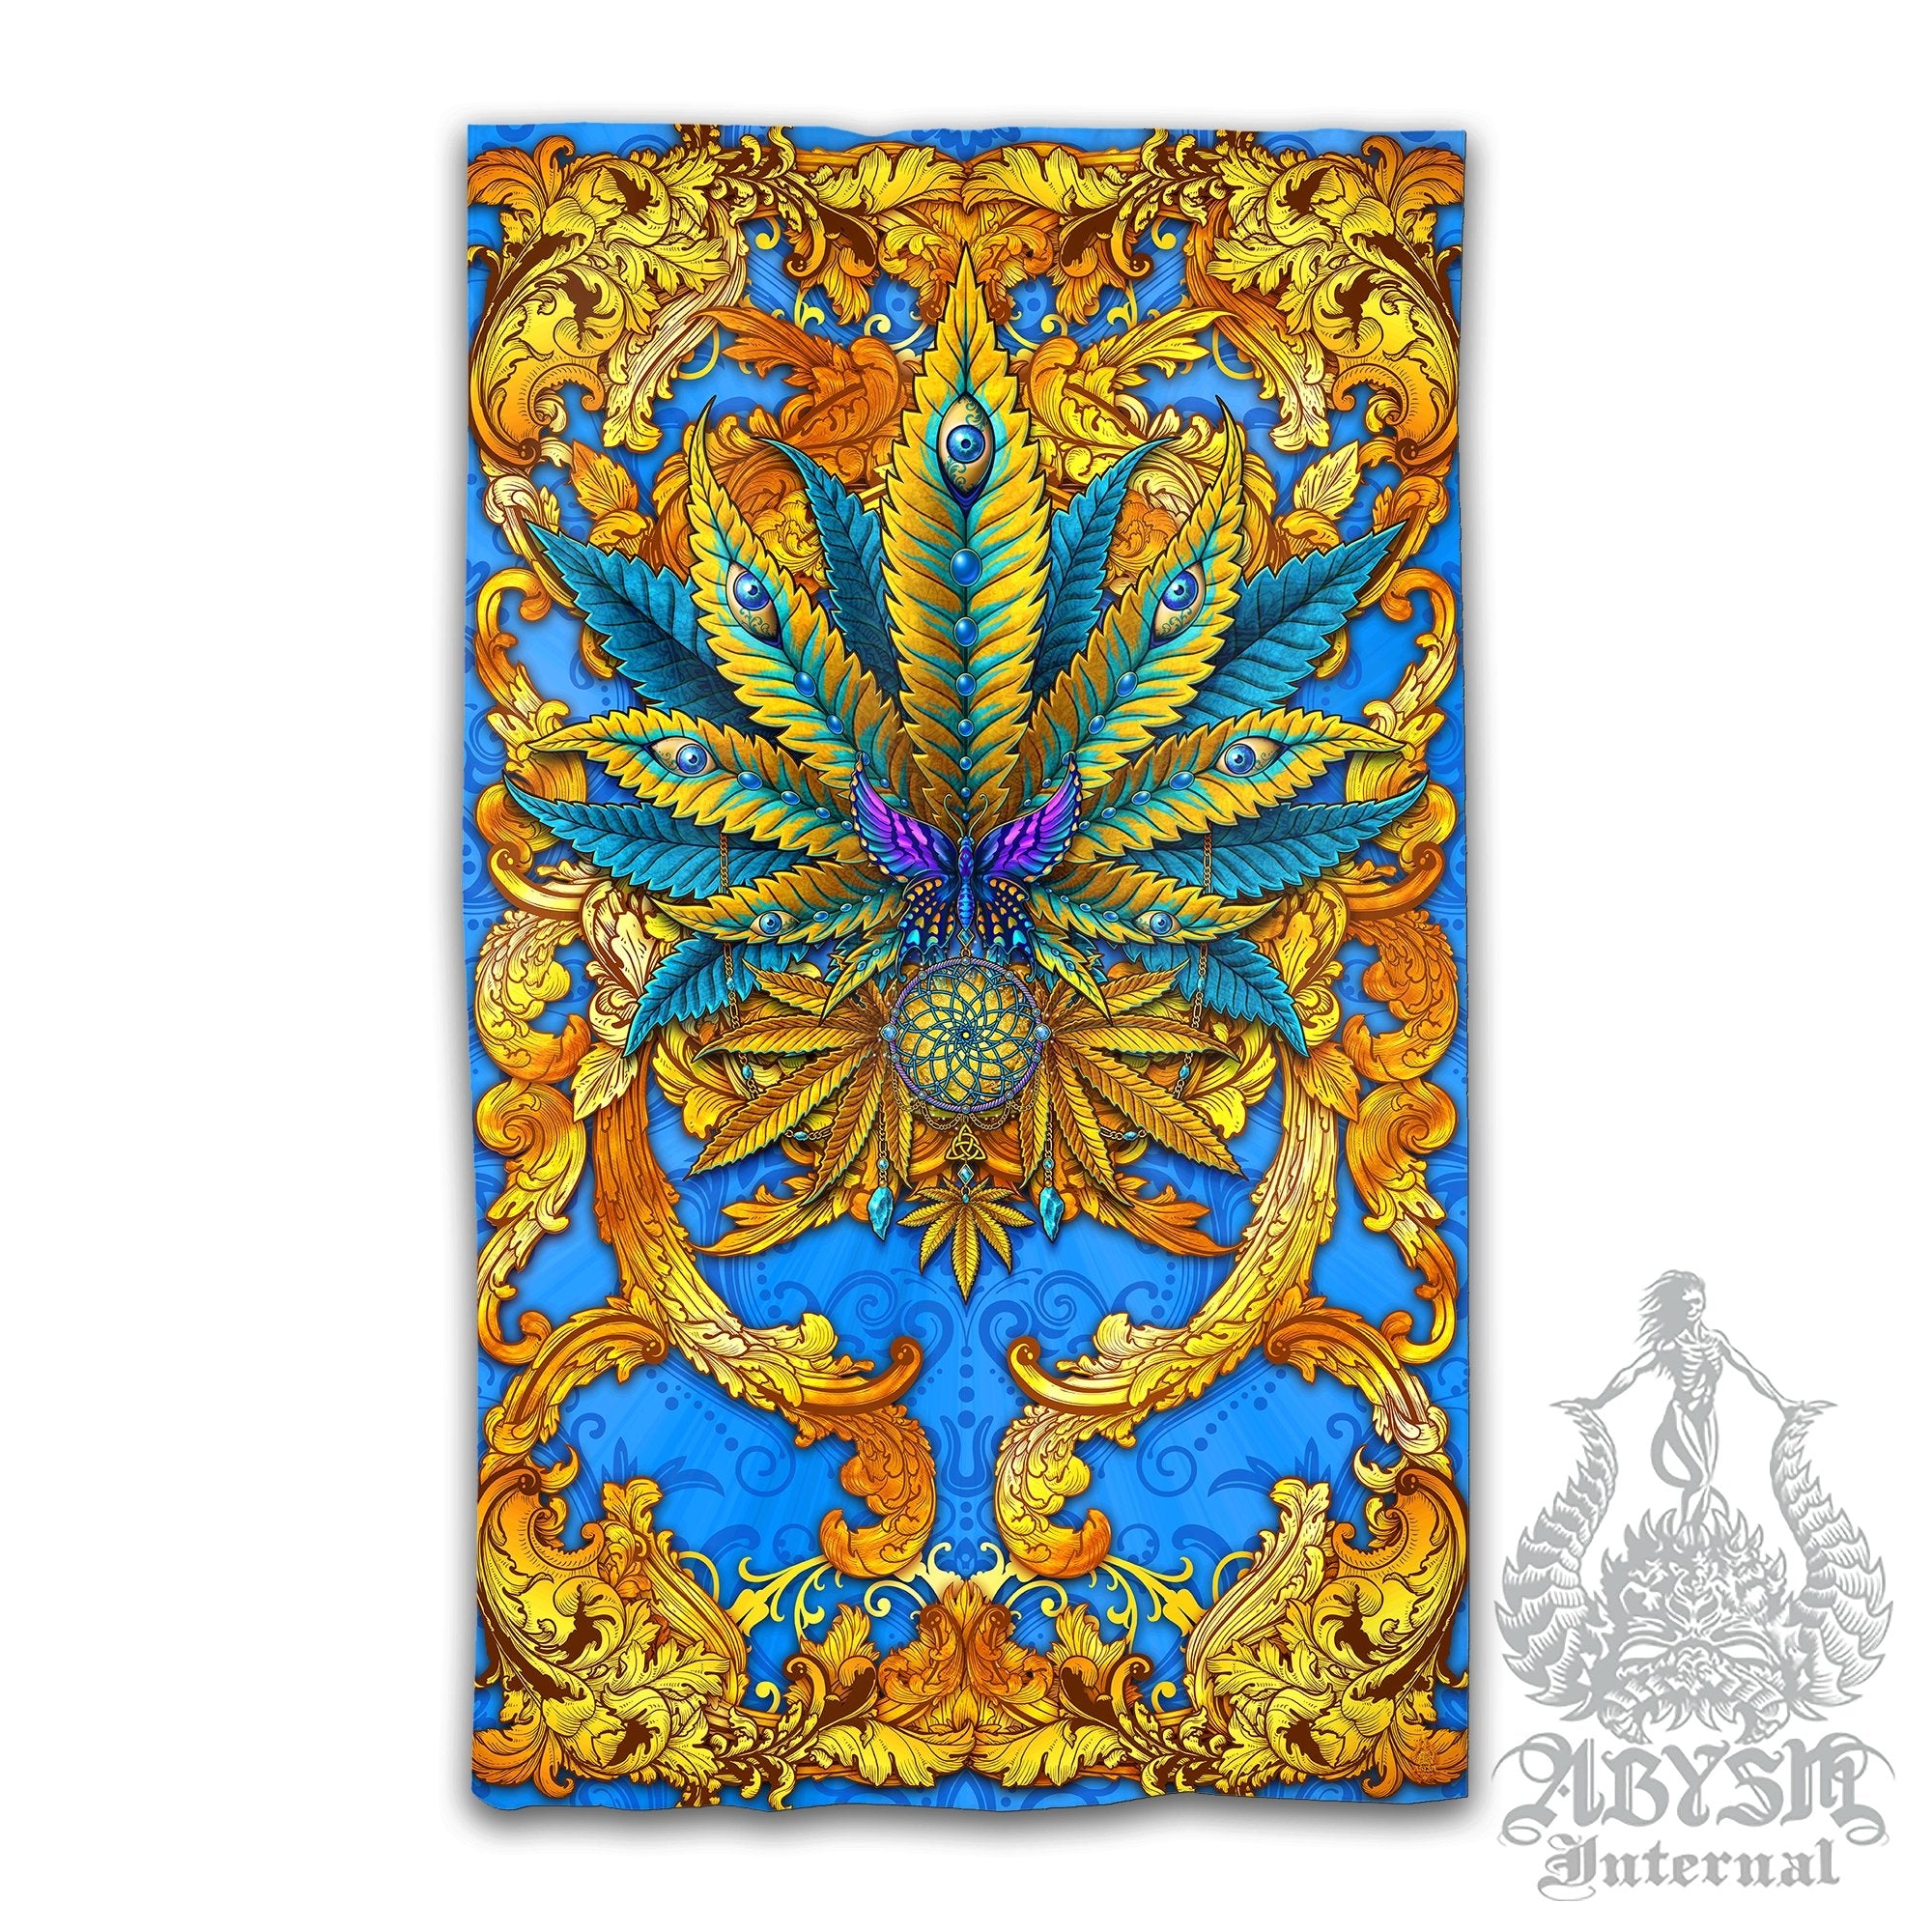 Weed Blackout Curtains, Cannabis Home and Shop Decor, Long Window Panels, Indie Hippie Print, 420 Room Art - Cyan and Gold - Abysm Internal